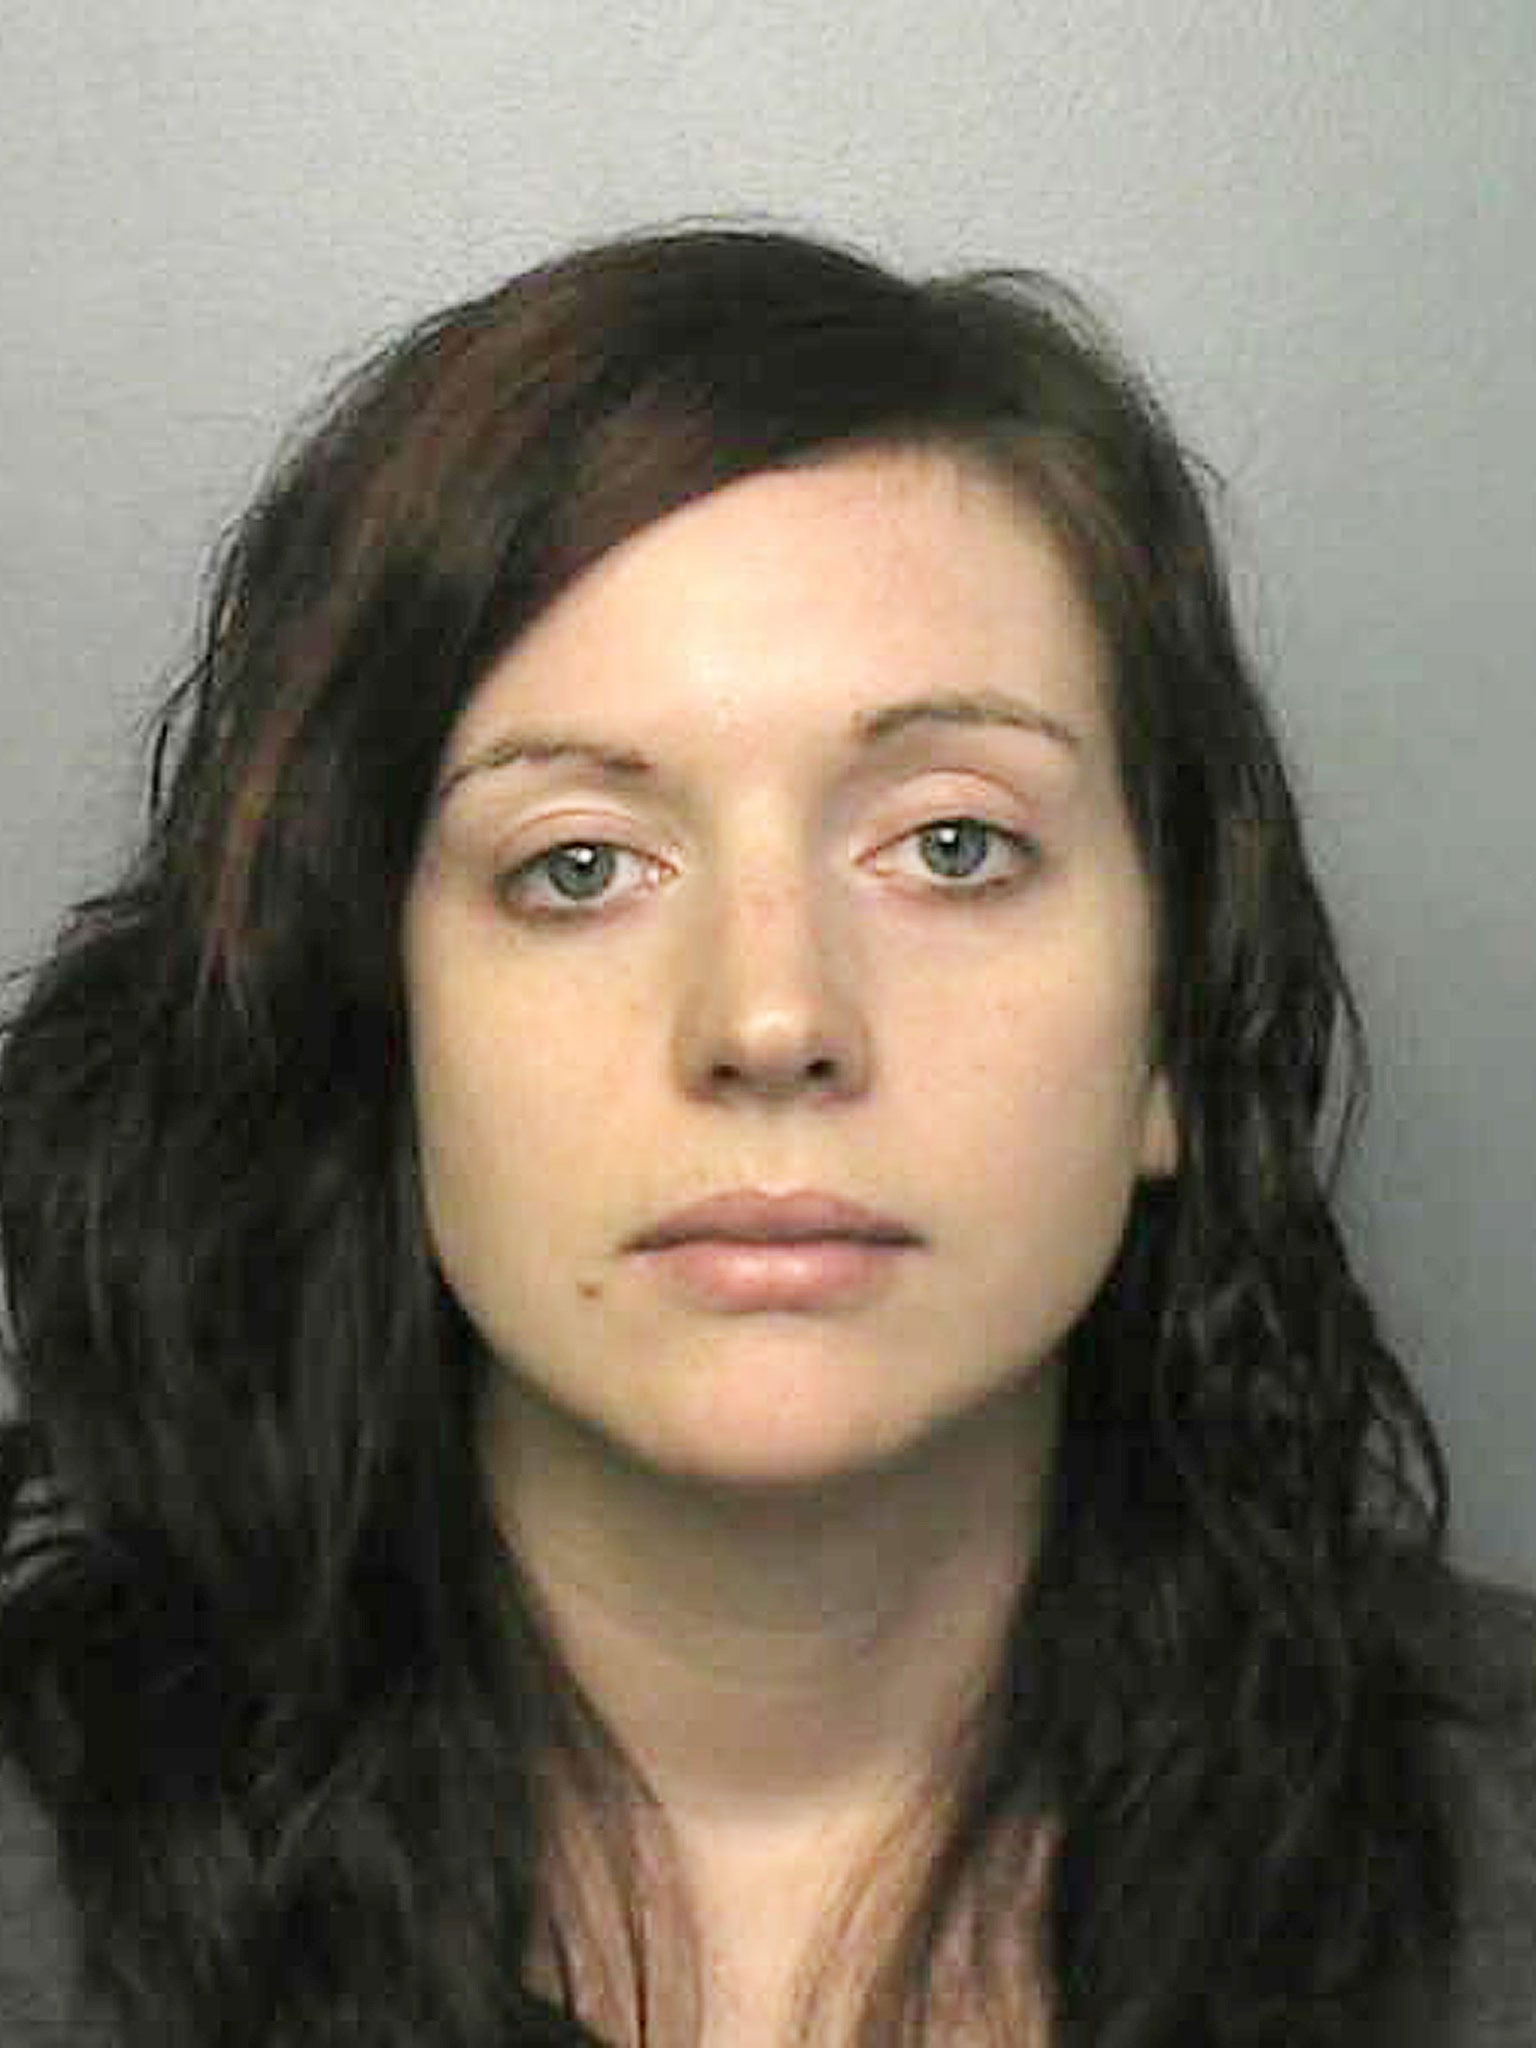 Emma Wilson, aged 25, of Windsor who was jailed for life at the Old Bailey on Friday